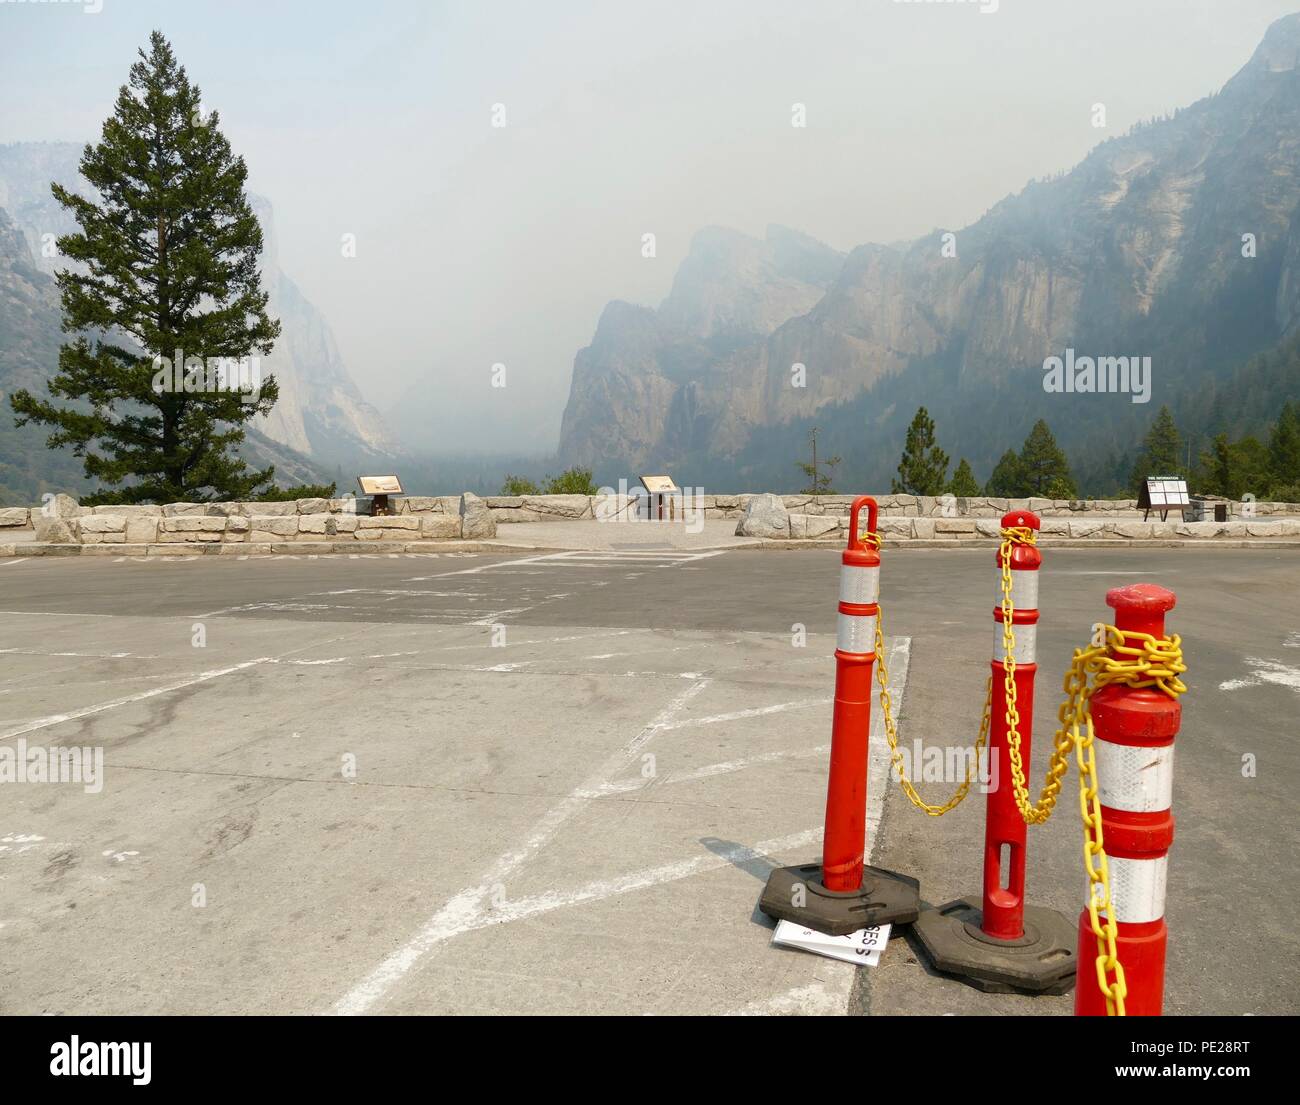 Yosemite, USA. 10th Aug, 2018. The lookout spot Glacier Point, where cars and buses normally stand, is deserted. The Yosemite Valley is one of the biggest tourist attractions in the USA. But forest fires have now made the California nature reserve a restricted area. Credit: Barbara Munker/dpa/Alamy Live News Stock Photo